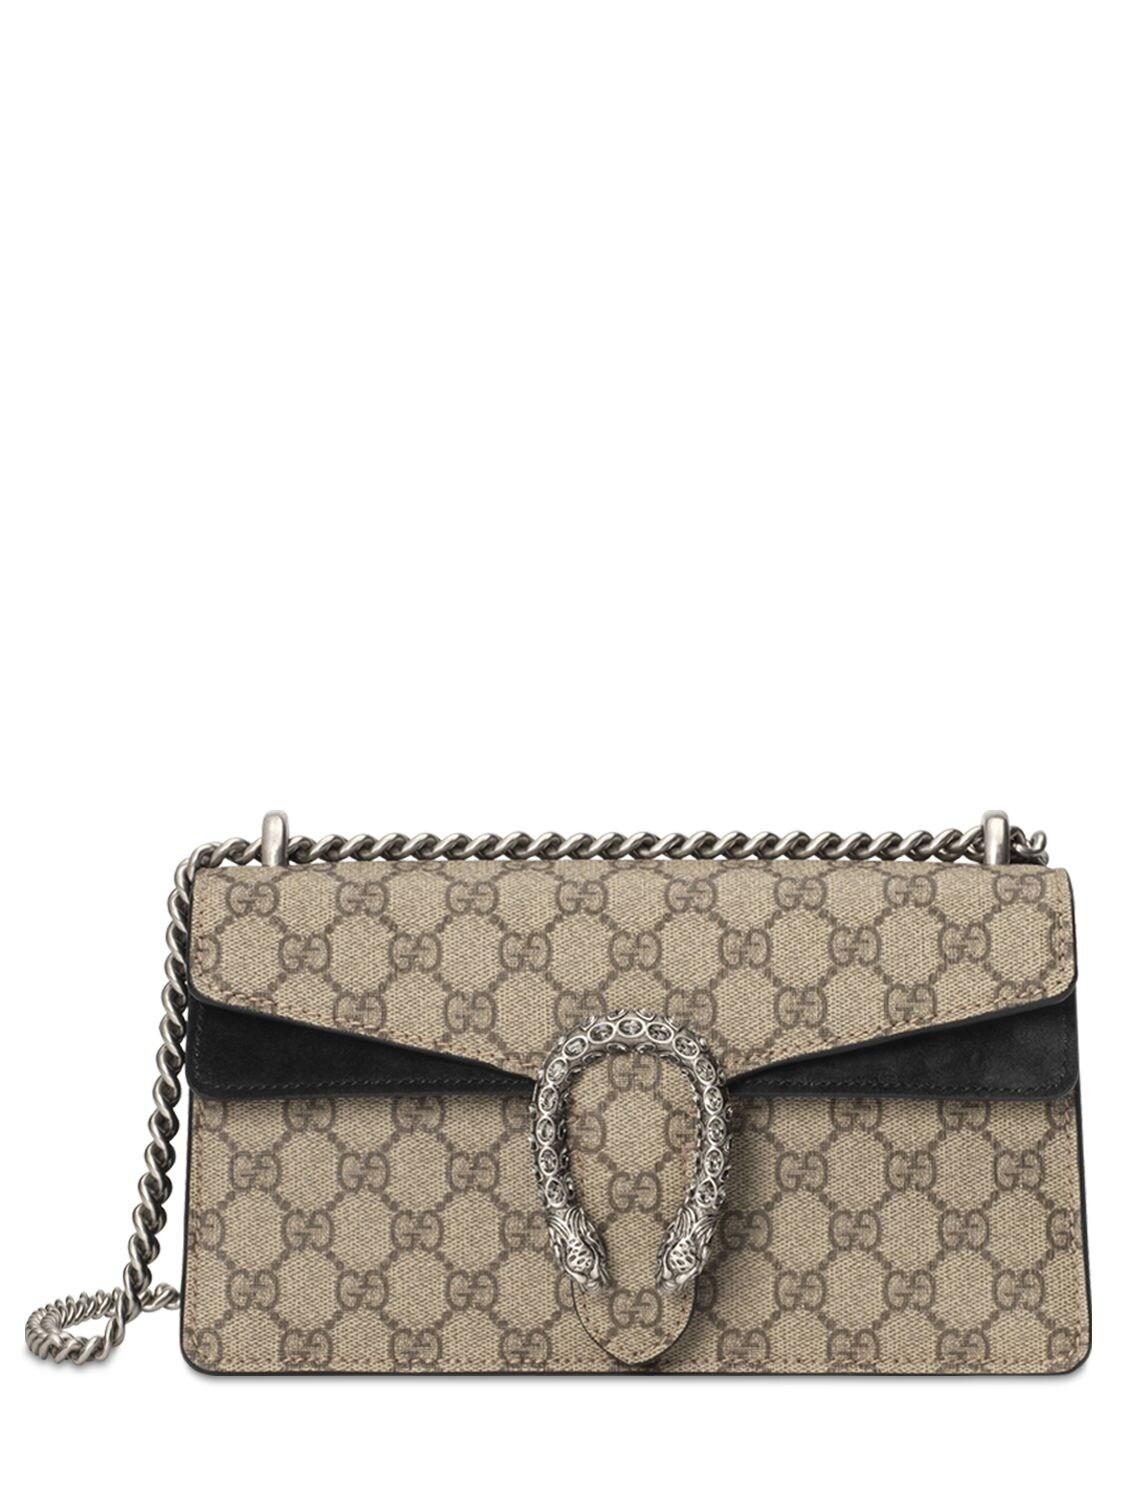 Gucci Canvas Dionysus Small GG Shoulder Bag in Taupe/Black (Natural) - Save  19% - Lyst